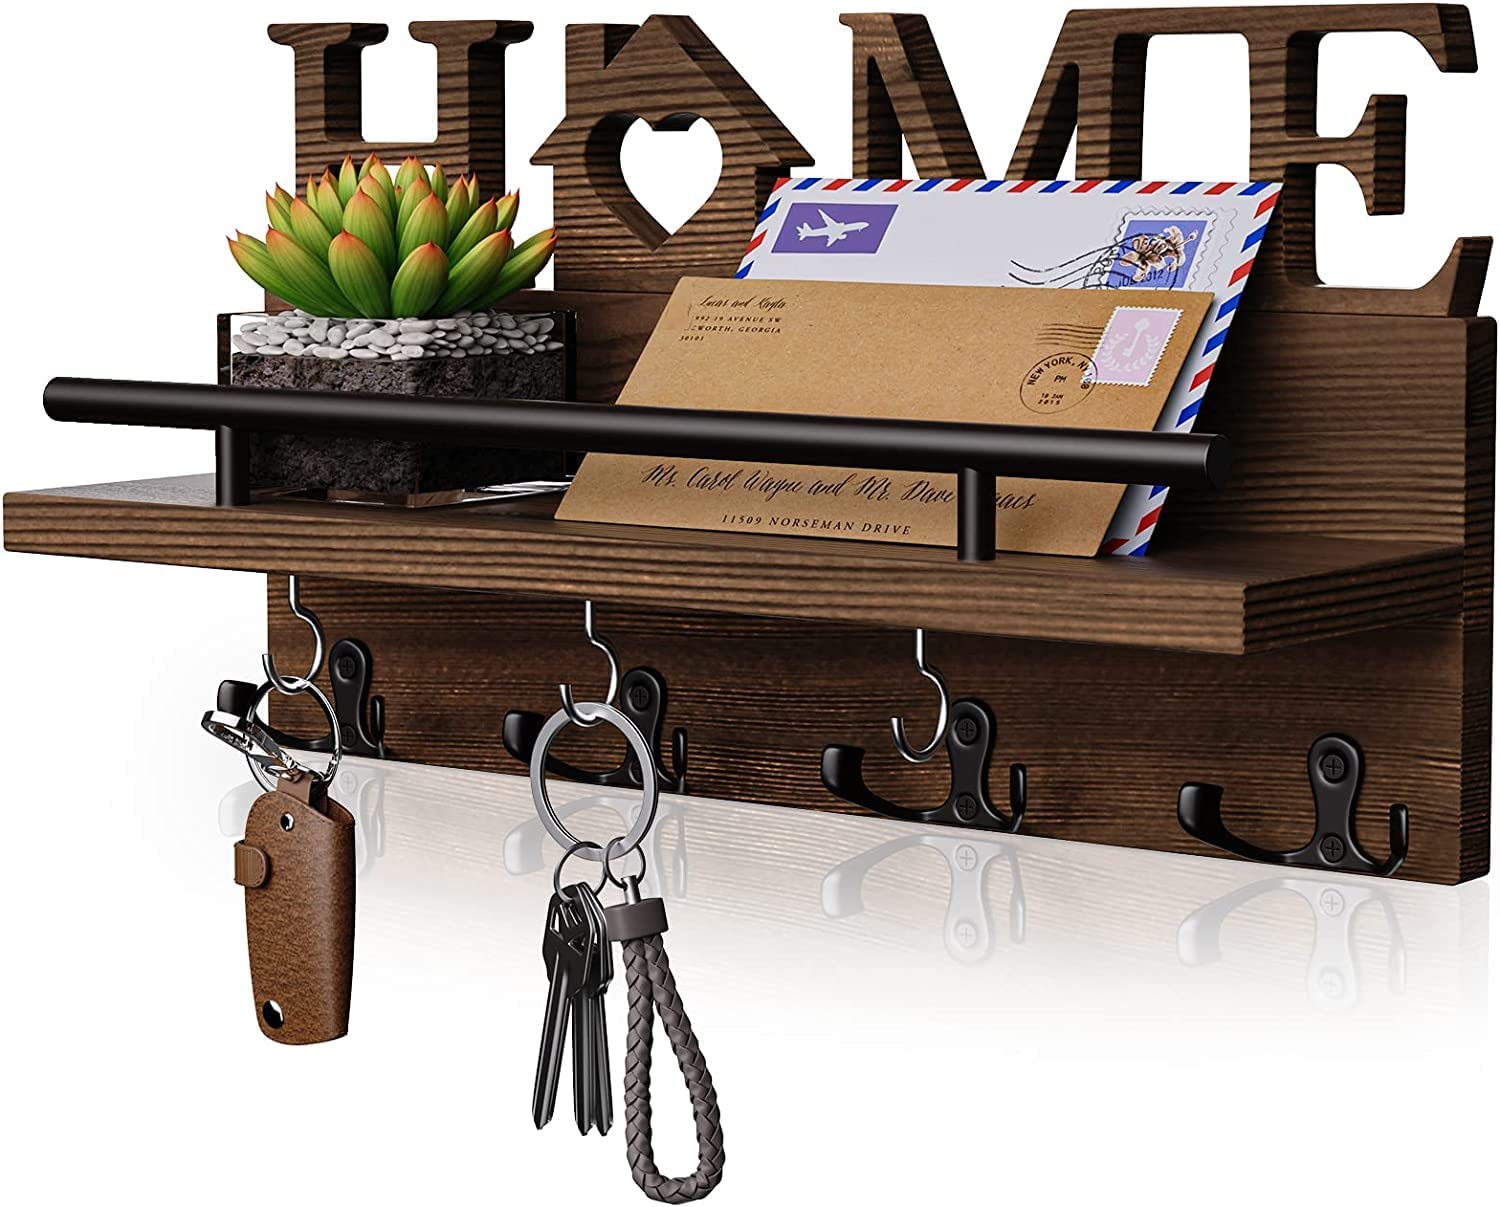 Key Holder for Wall with Home Decoration, Key Hanger with 7 Sturdy Key Hooks and Mail Holder Design, Decor Wood Key Rack for Hallway, Entryway, Mudroom, Office, Brown - FoxMart™️ - SWTYMIKI